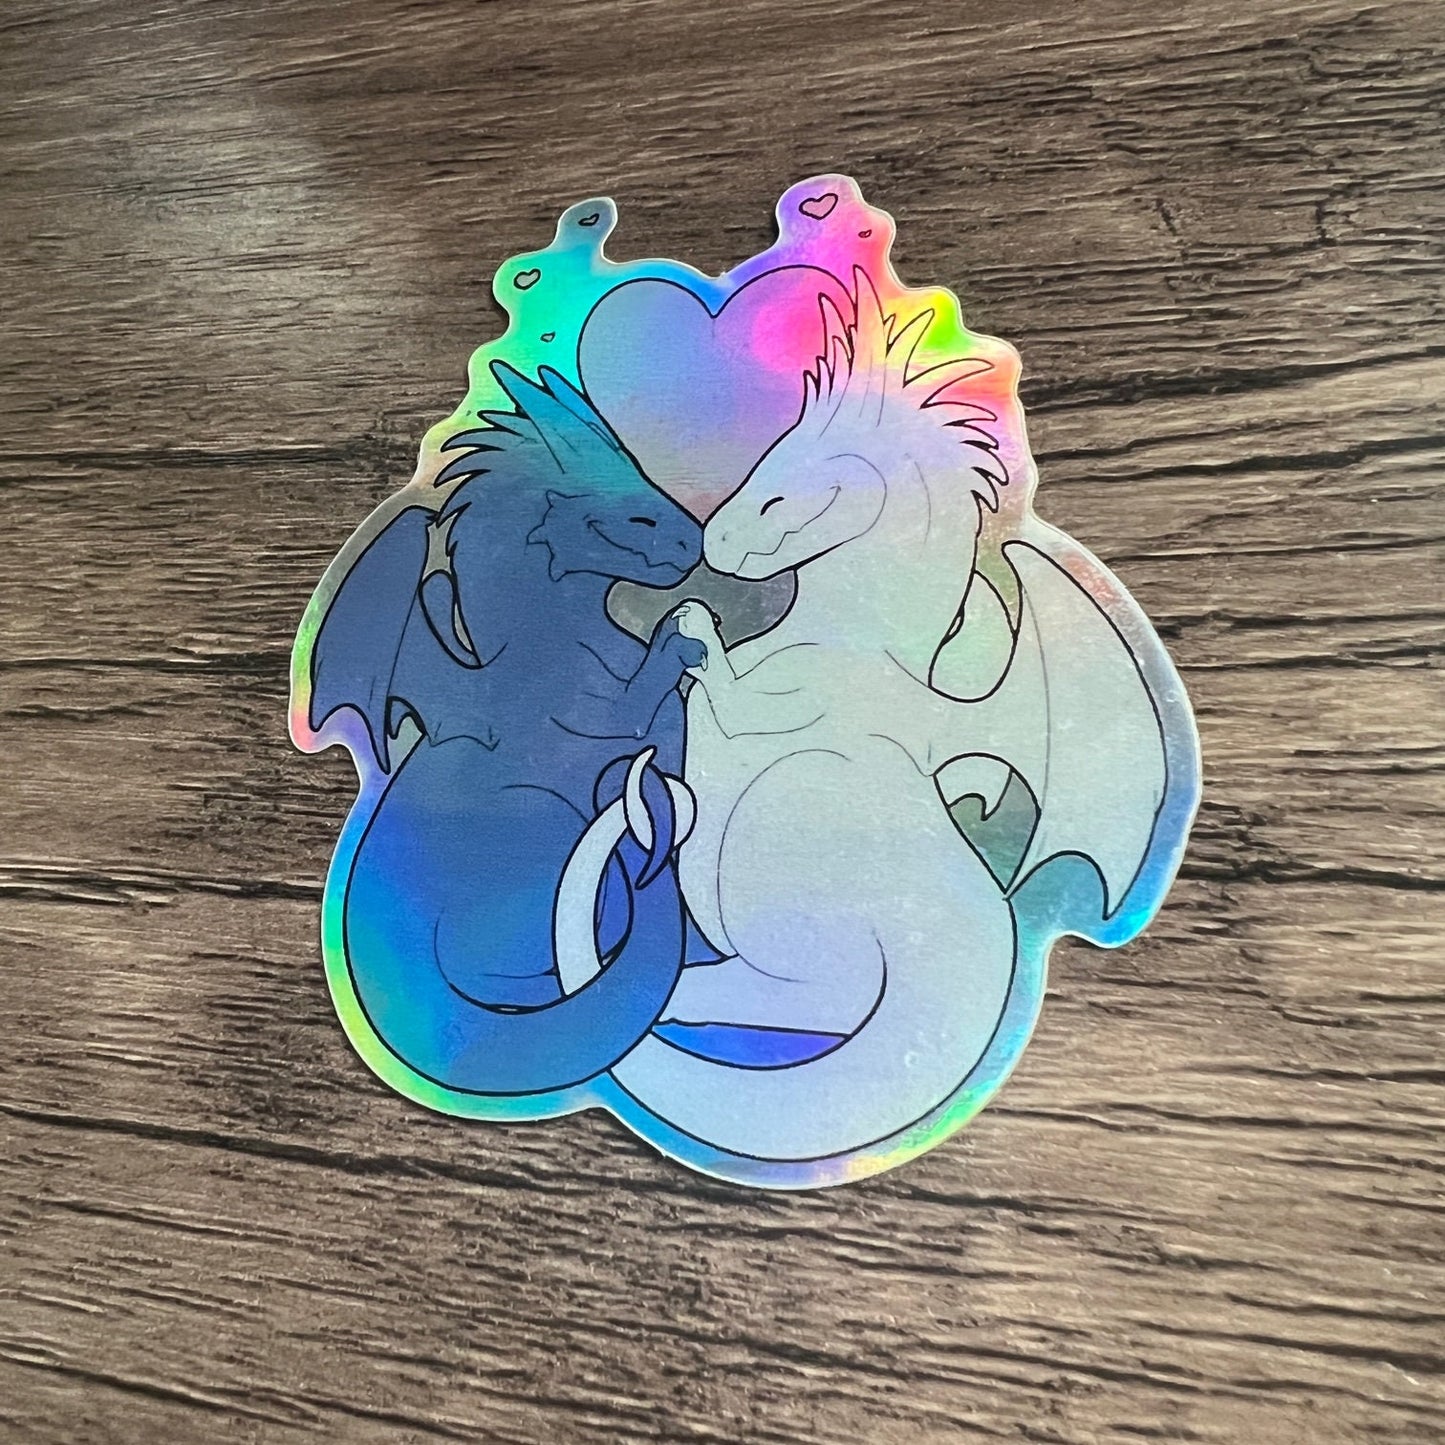 Holographic Dragon Sticker | Iridescent Mythical Fantasy Love Decal | Water Bottle Laptop Journal Scrapbook Art | Fairycore Whimsical